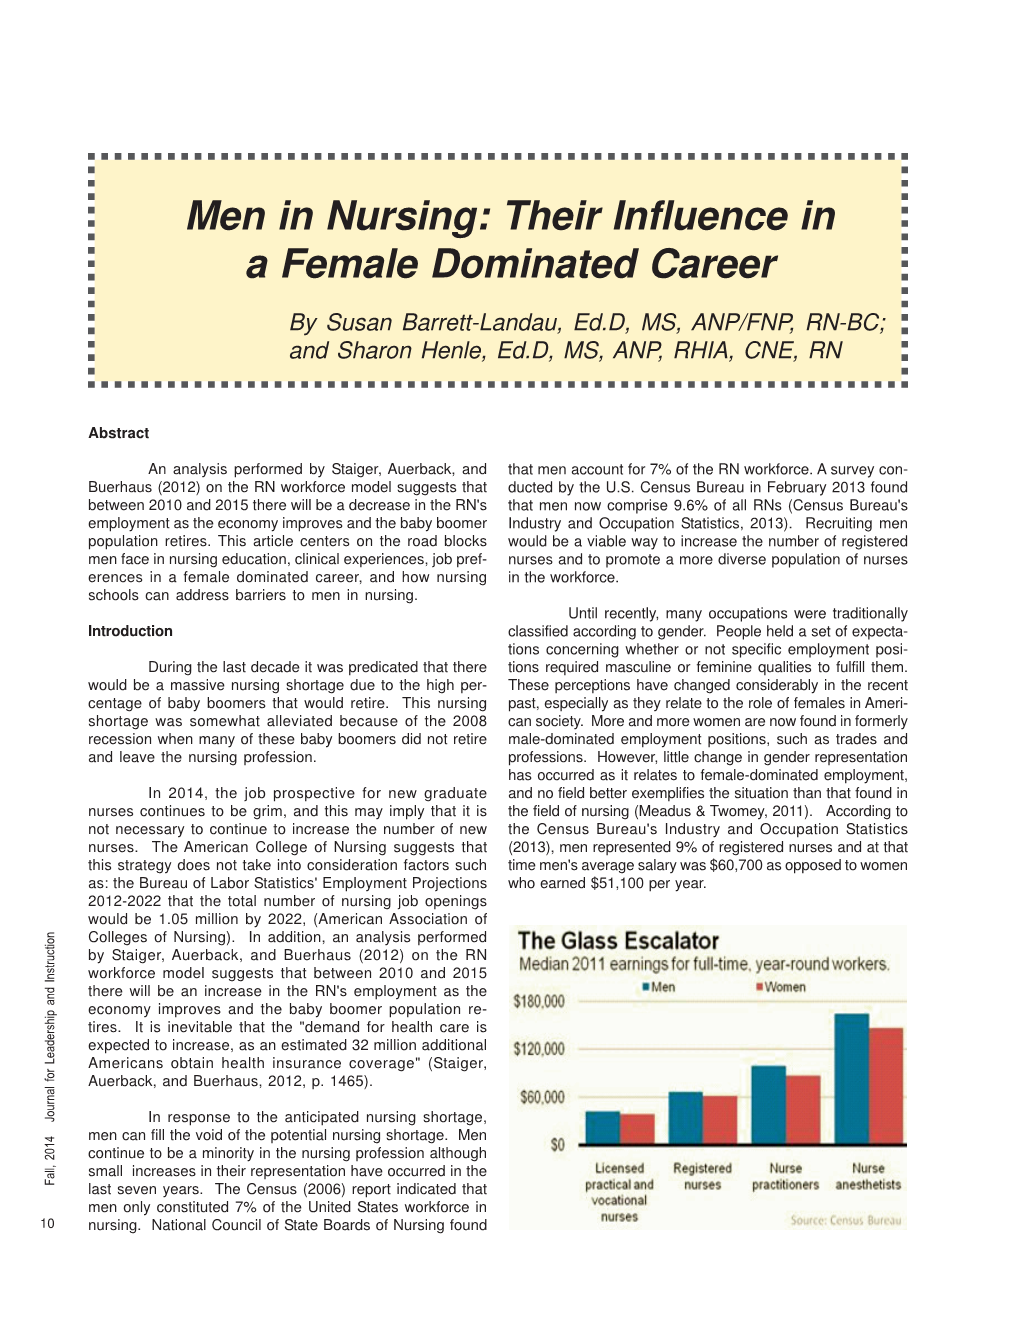 Men in Nursing: Their Influence in a Female Dominated Career